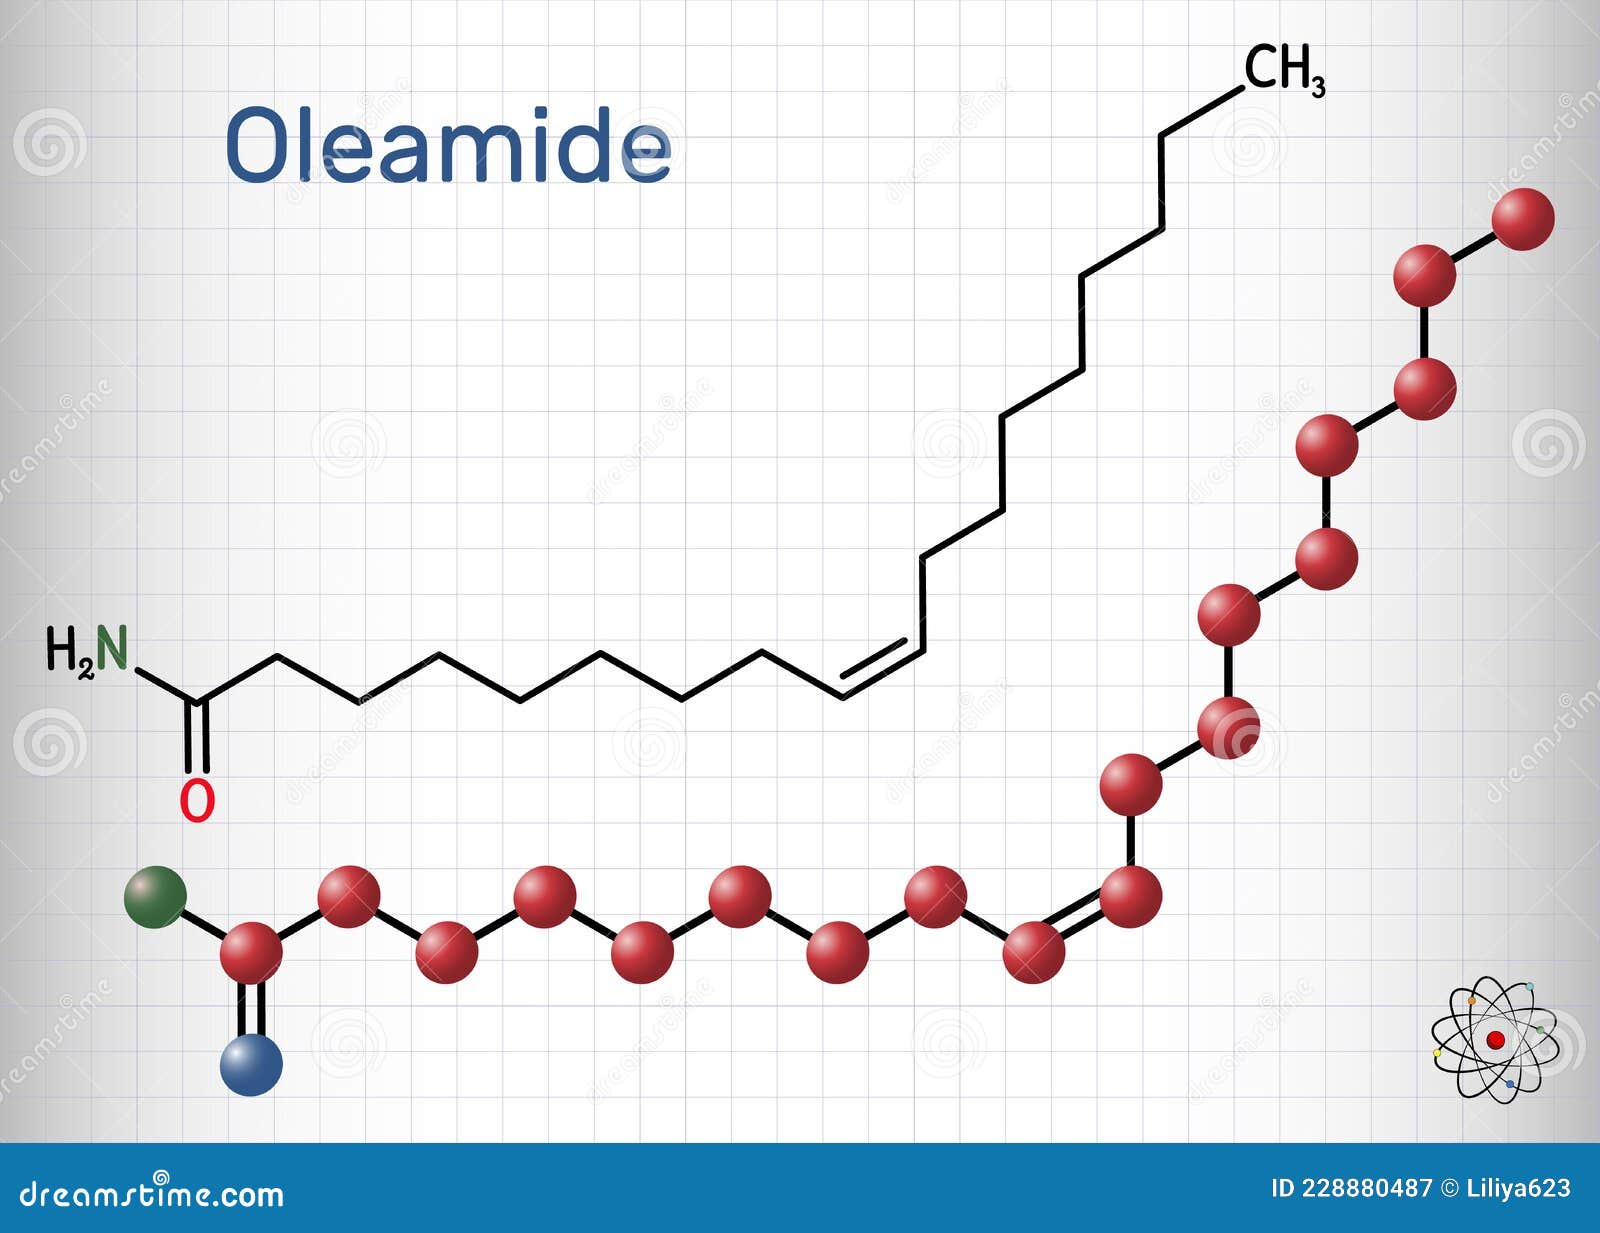 oleamide molecule. it is fatty amide derived from oleic acid. structural chemical formula and molecule model. sheet of paper in a